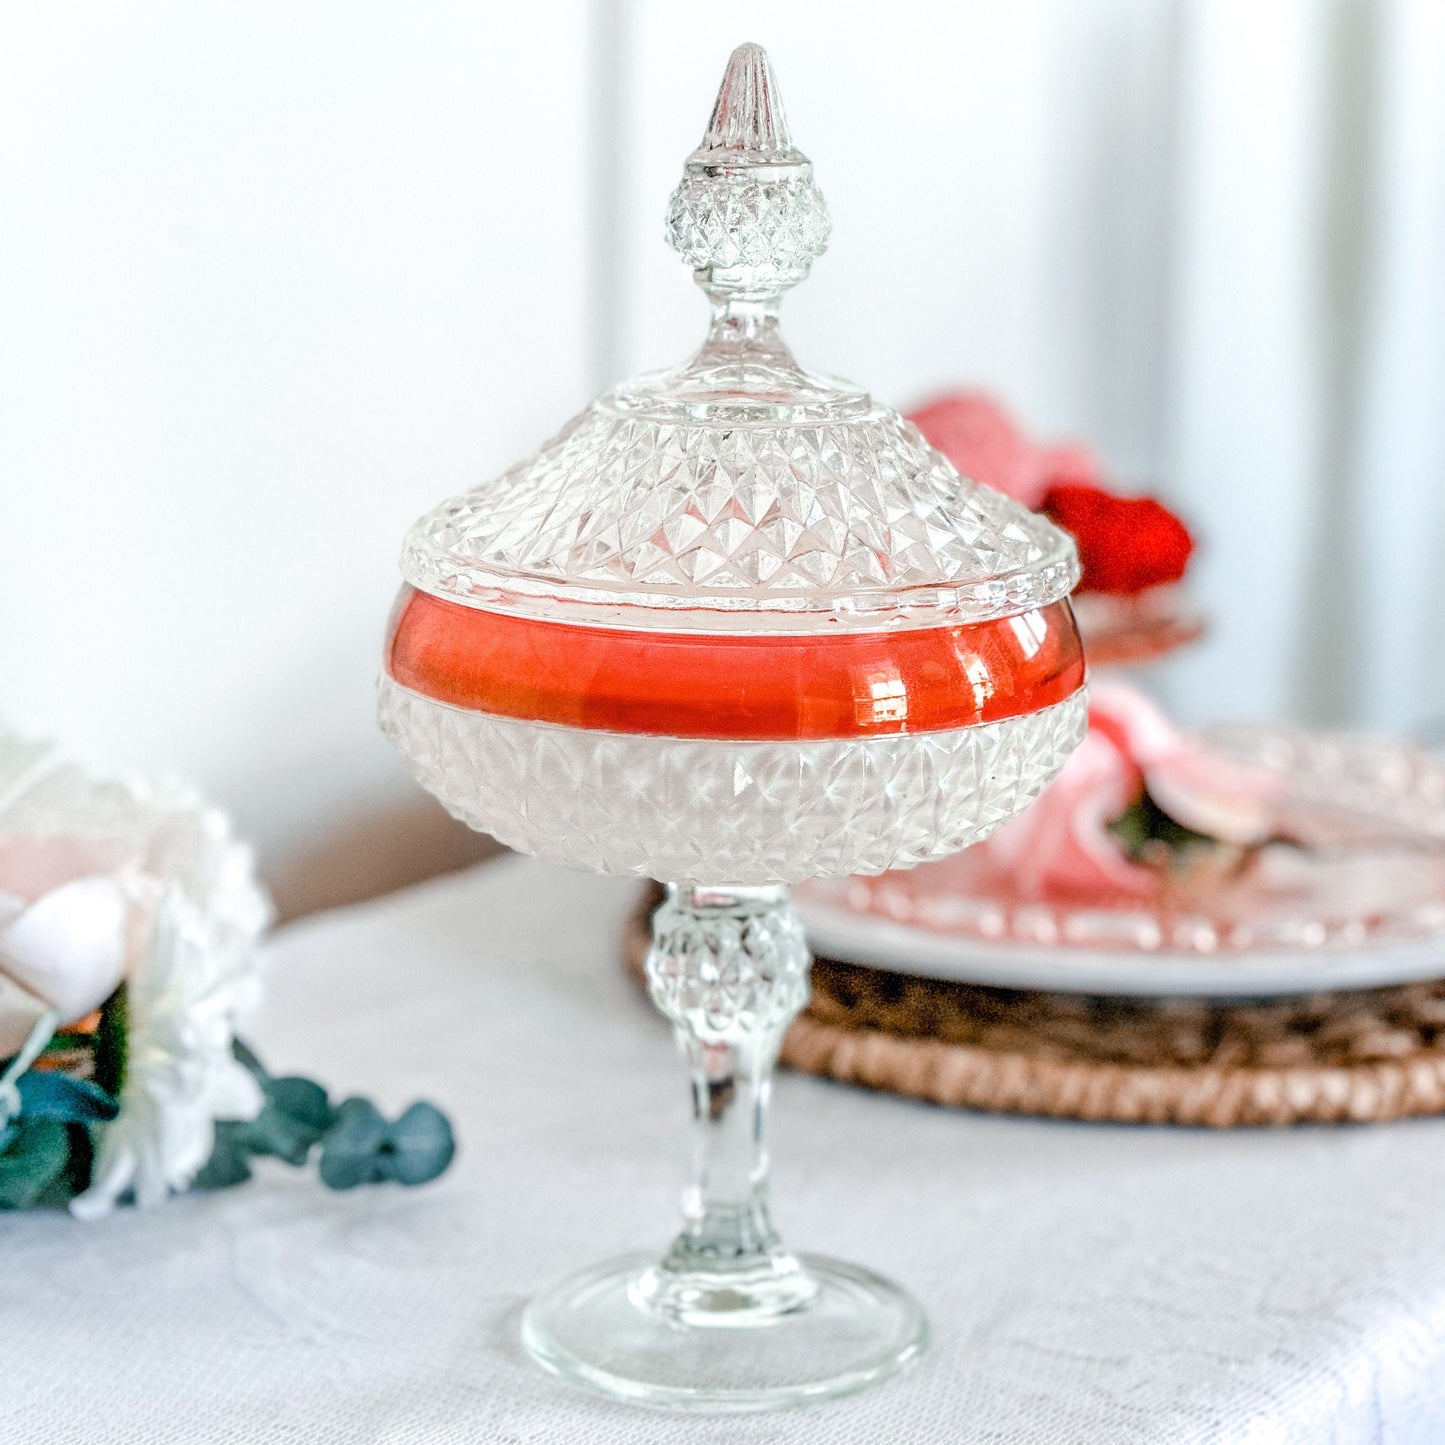 Unique Candles, Vintage, Candy Dish, Best Friend Gifts, Housewarming Gifts